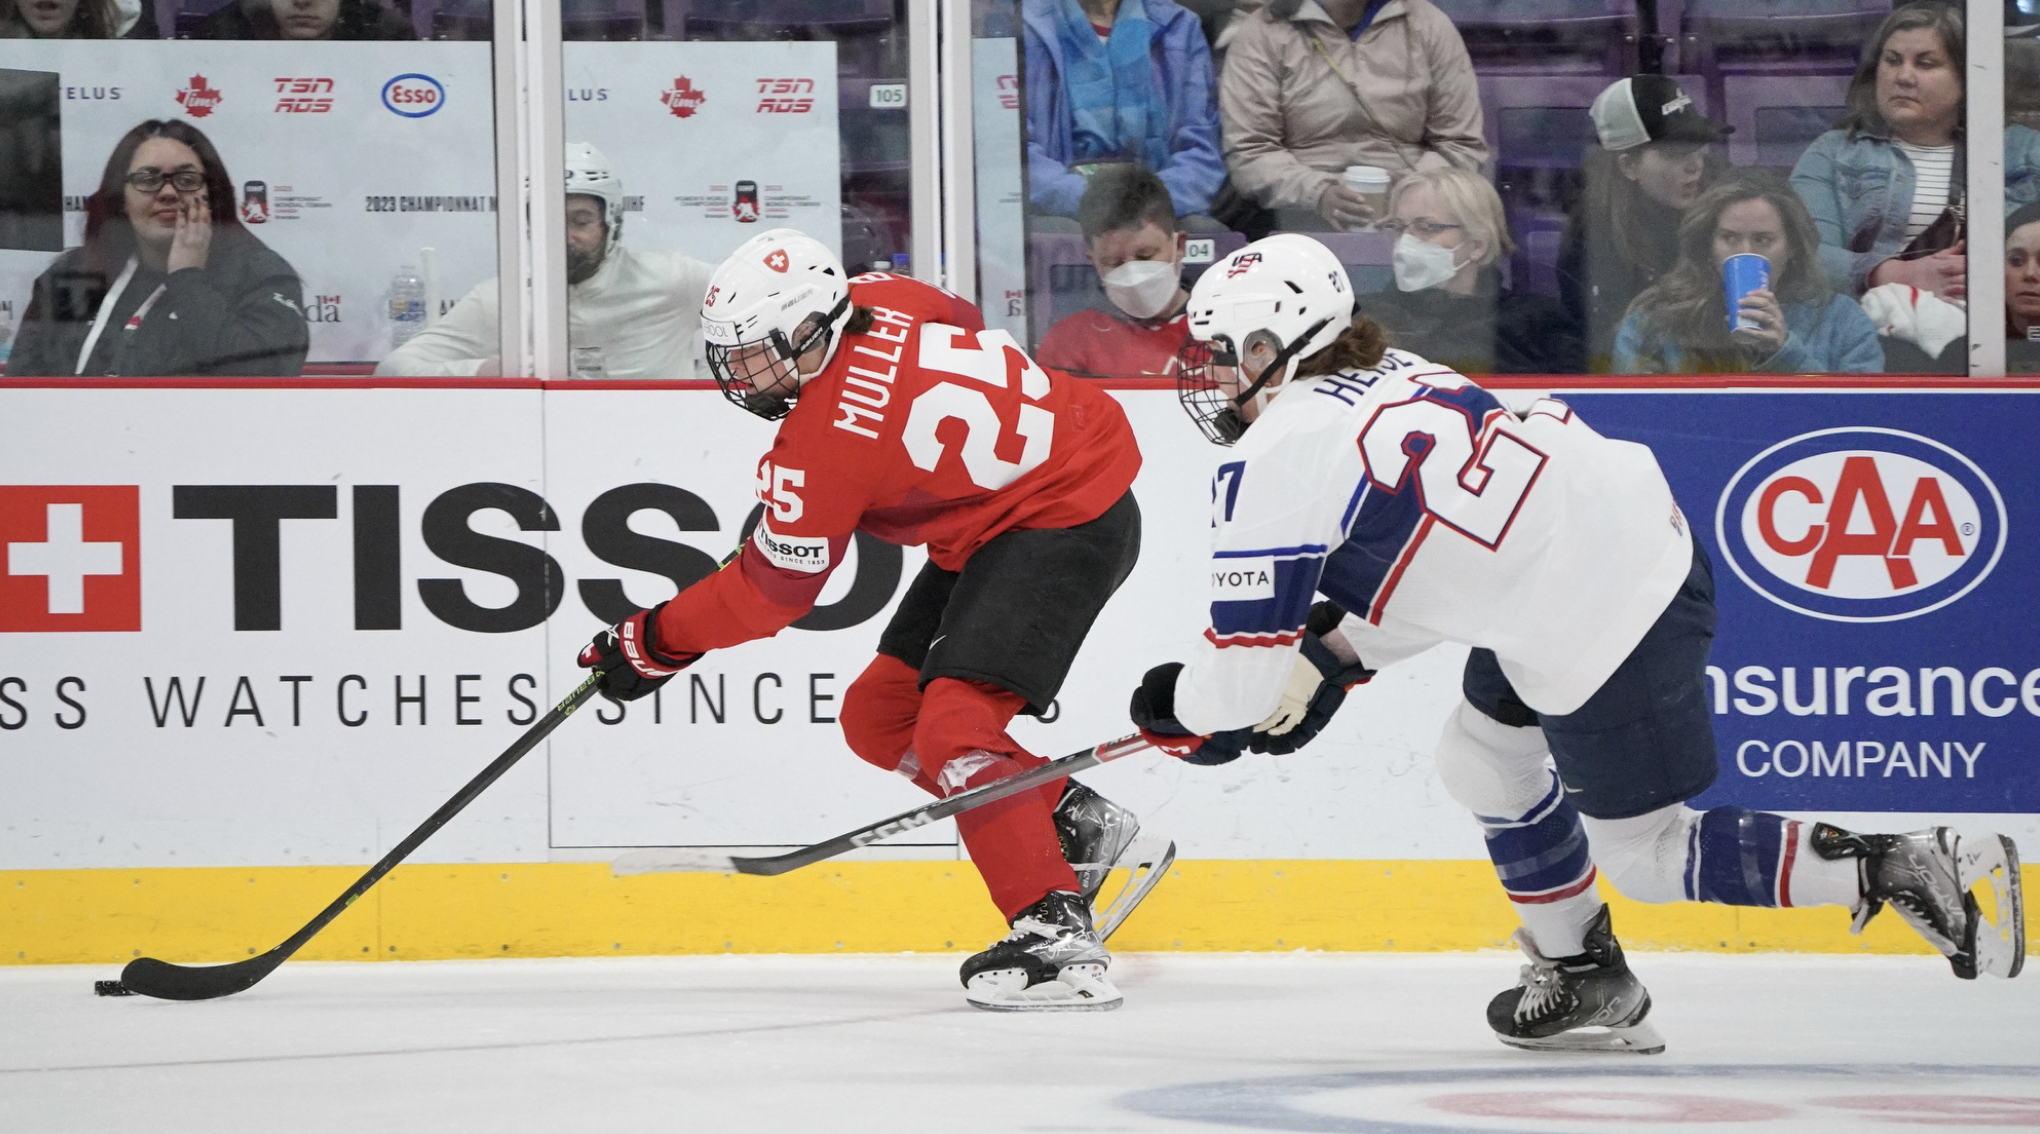 Alina Müller skates with the puck as Taylor Heise tries to catch her. Heise's stick is outstretched as she goes to defend. Müller is in a red uniform, while Heise is in white.